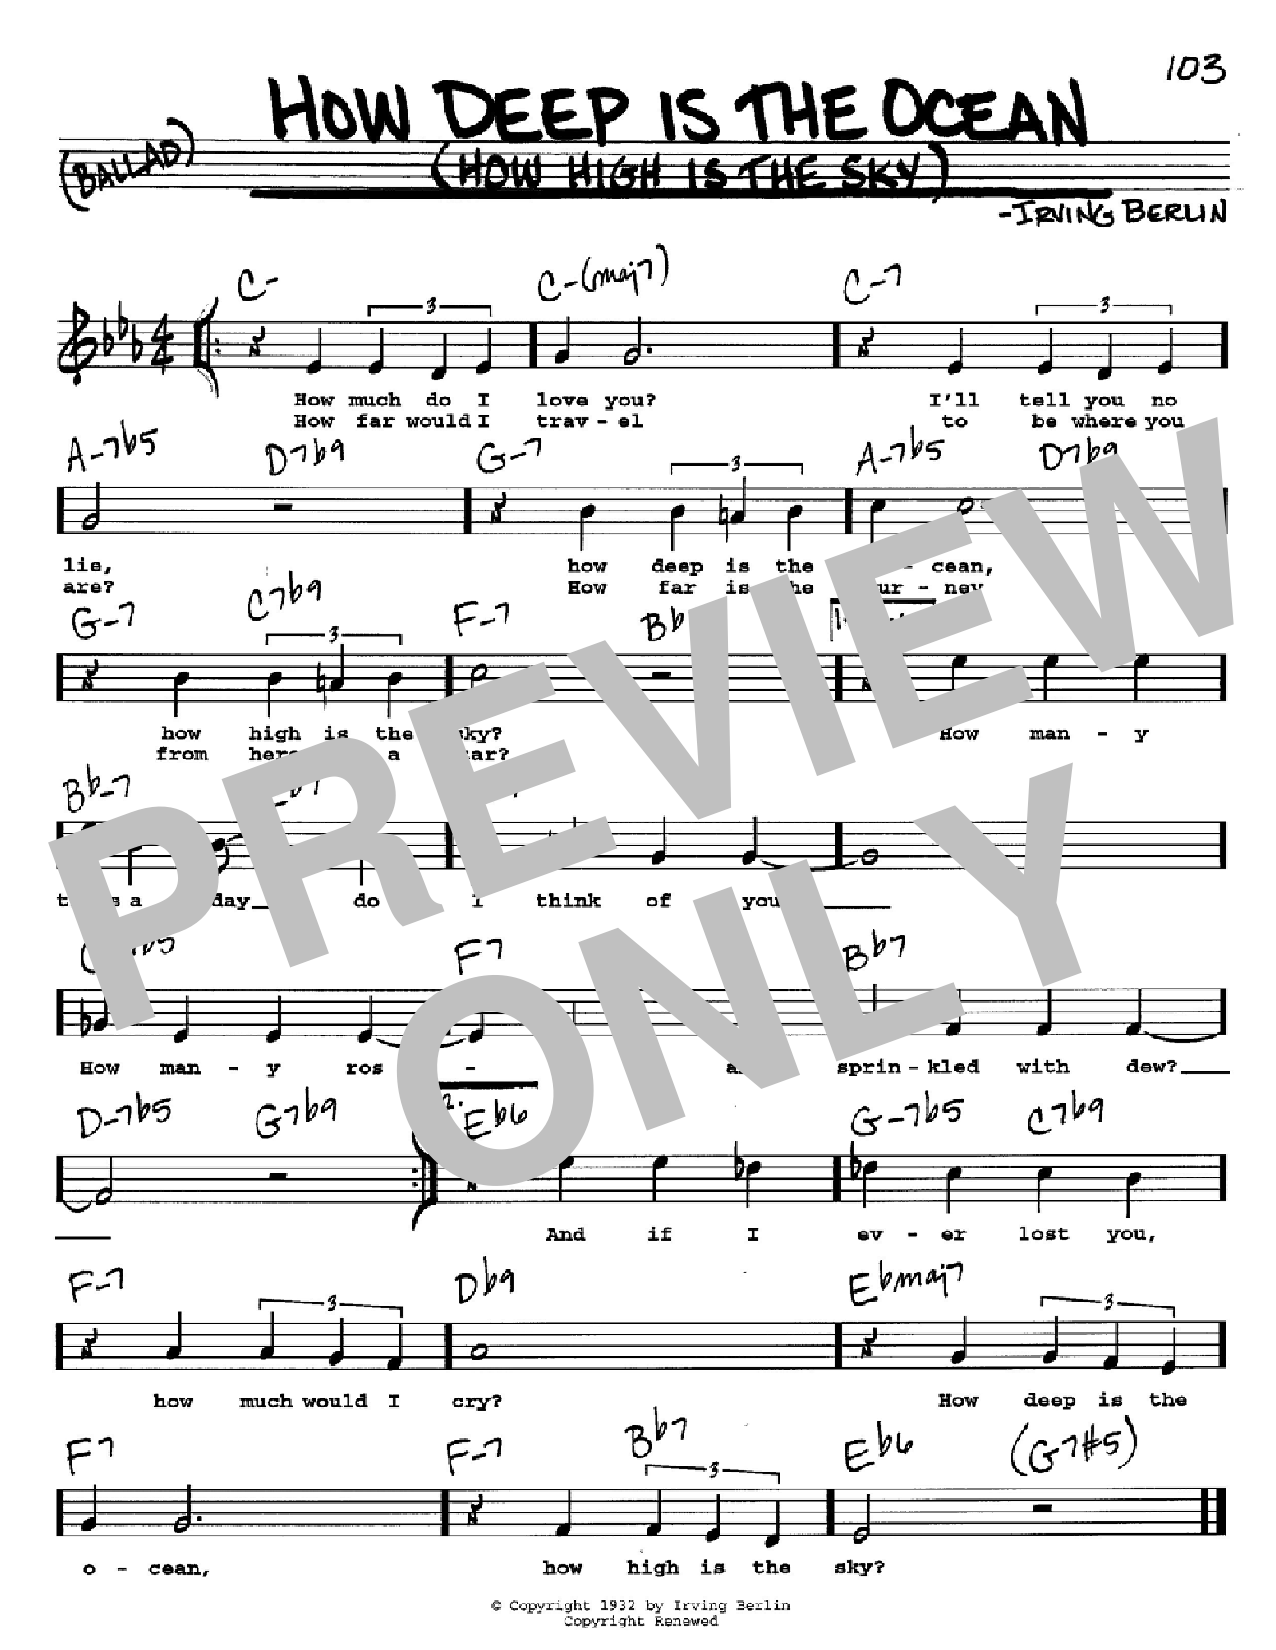 Download Irving Berlin How Deep Is The Ocean (How High Is The Sheet Music